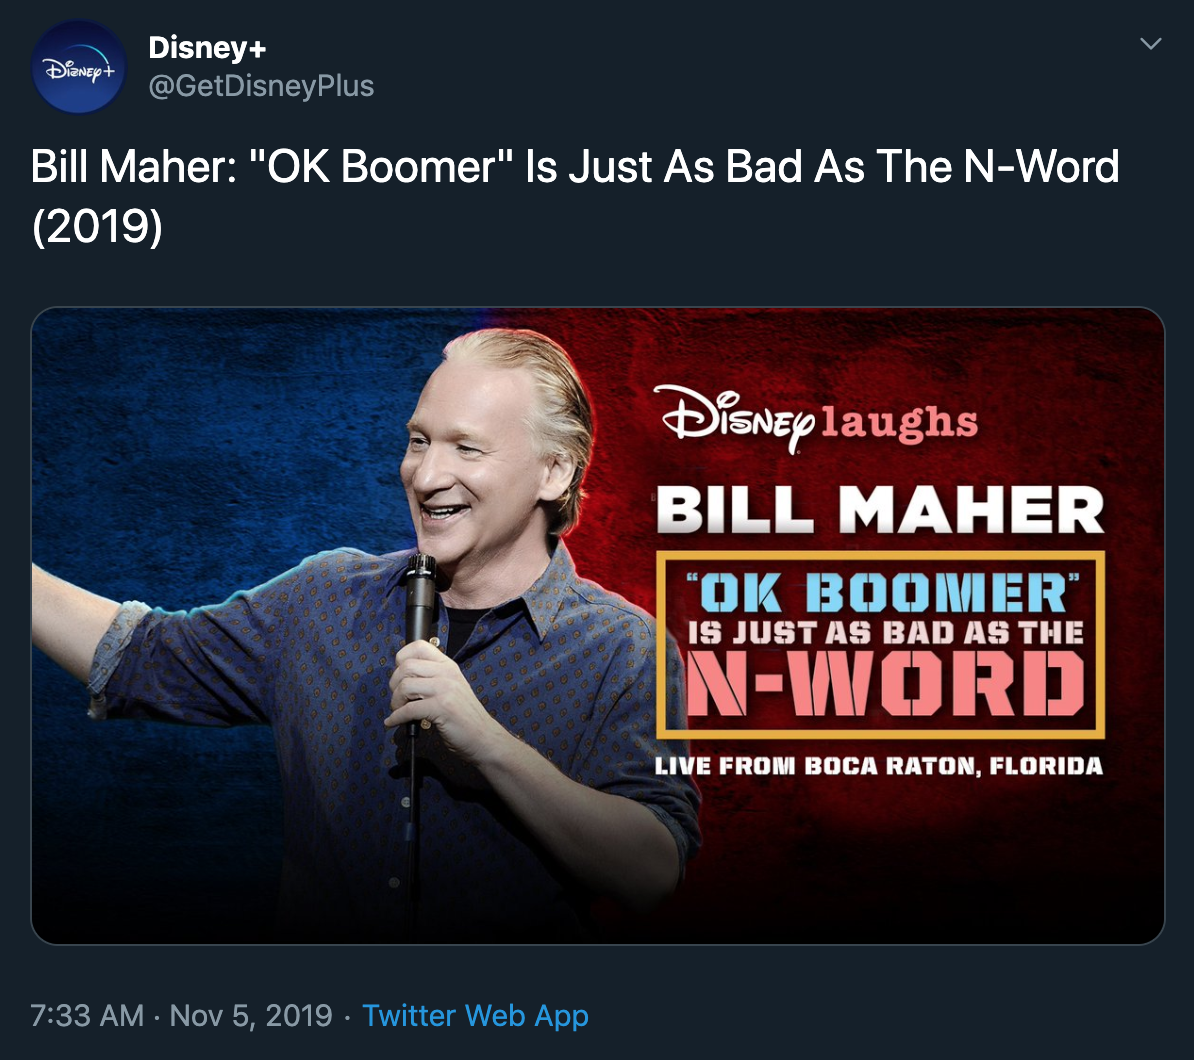 'Bill Maher: 'OK Boomer' Is Just as Bad as the N-Word'